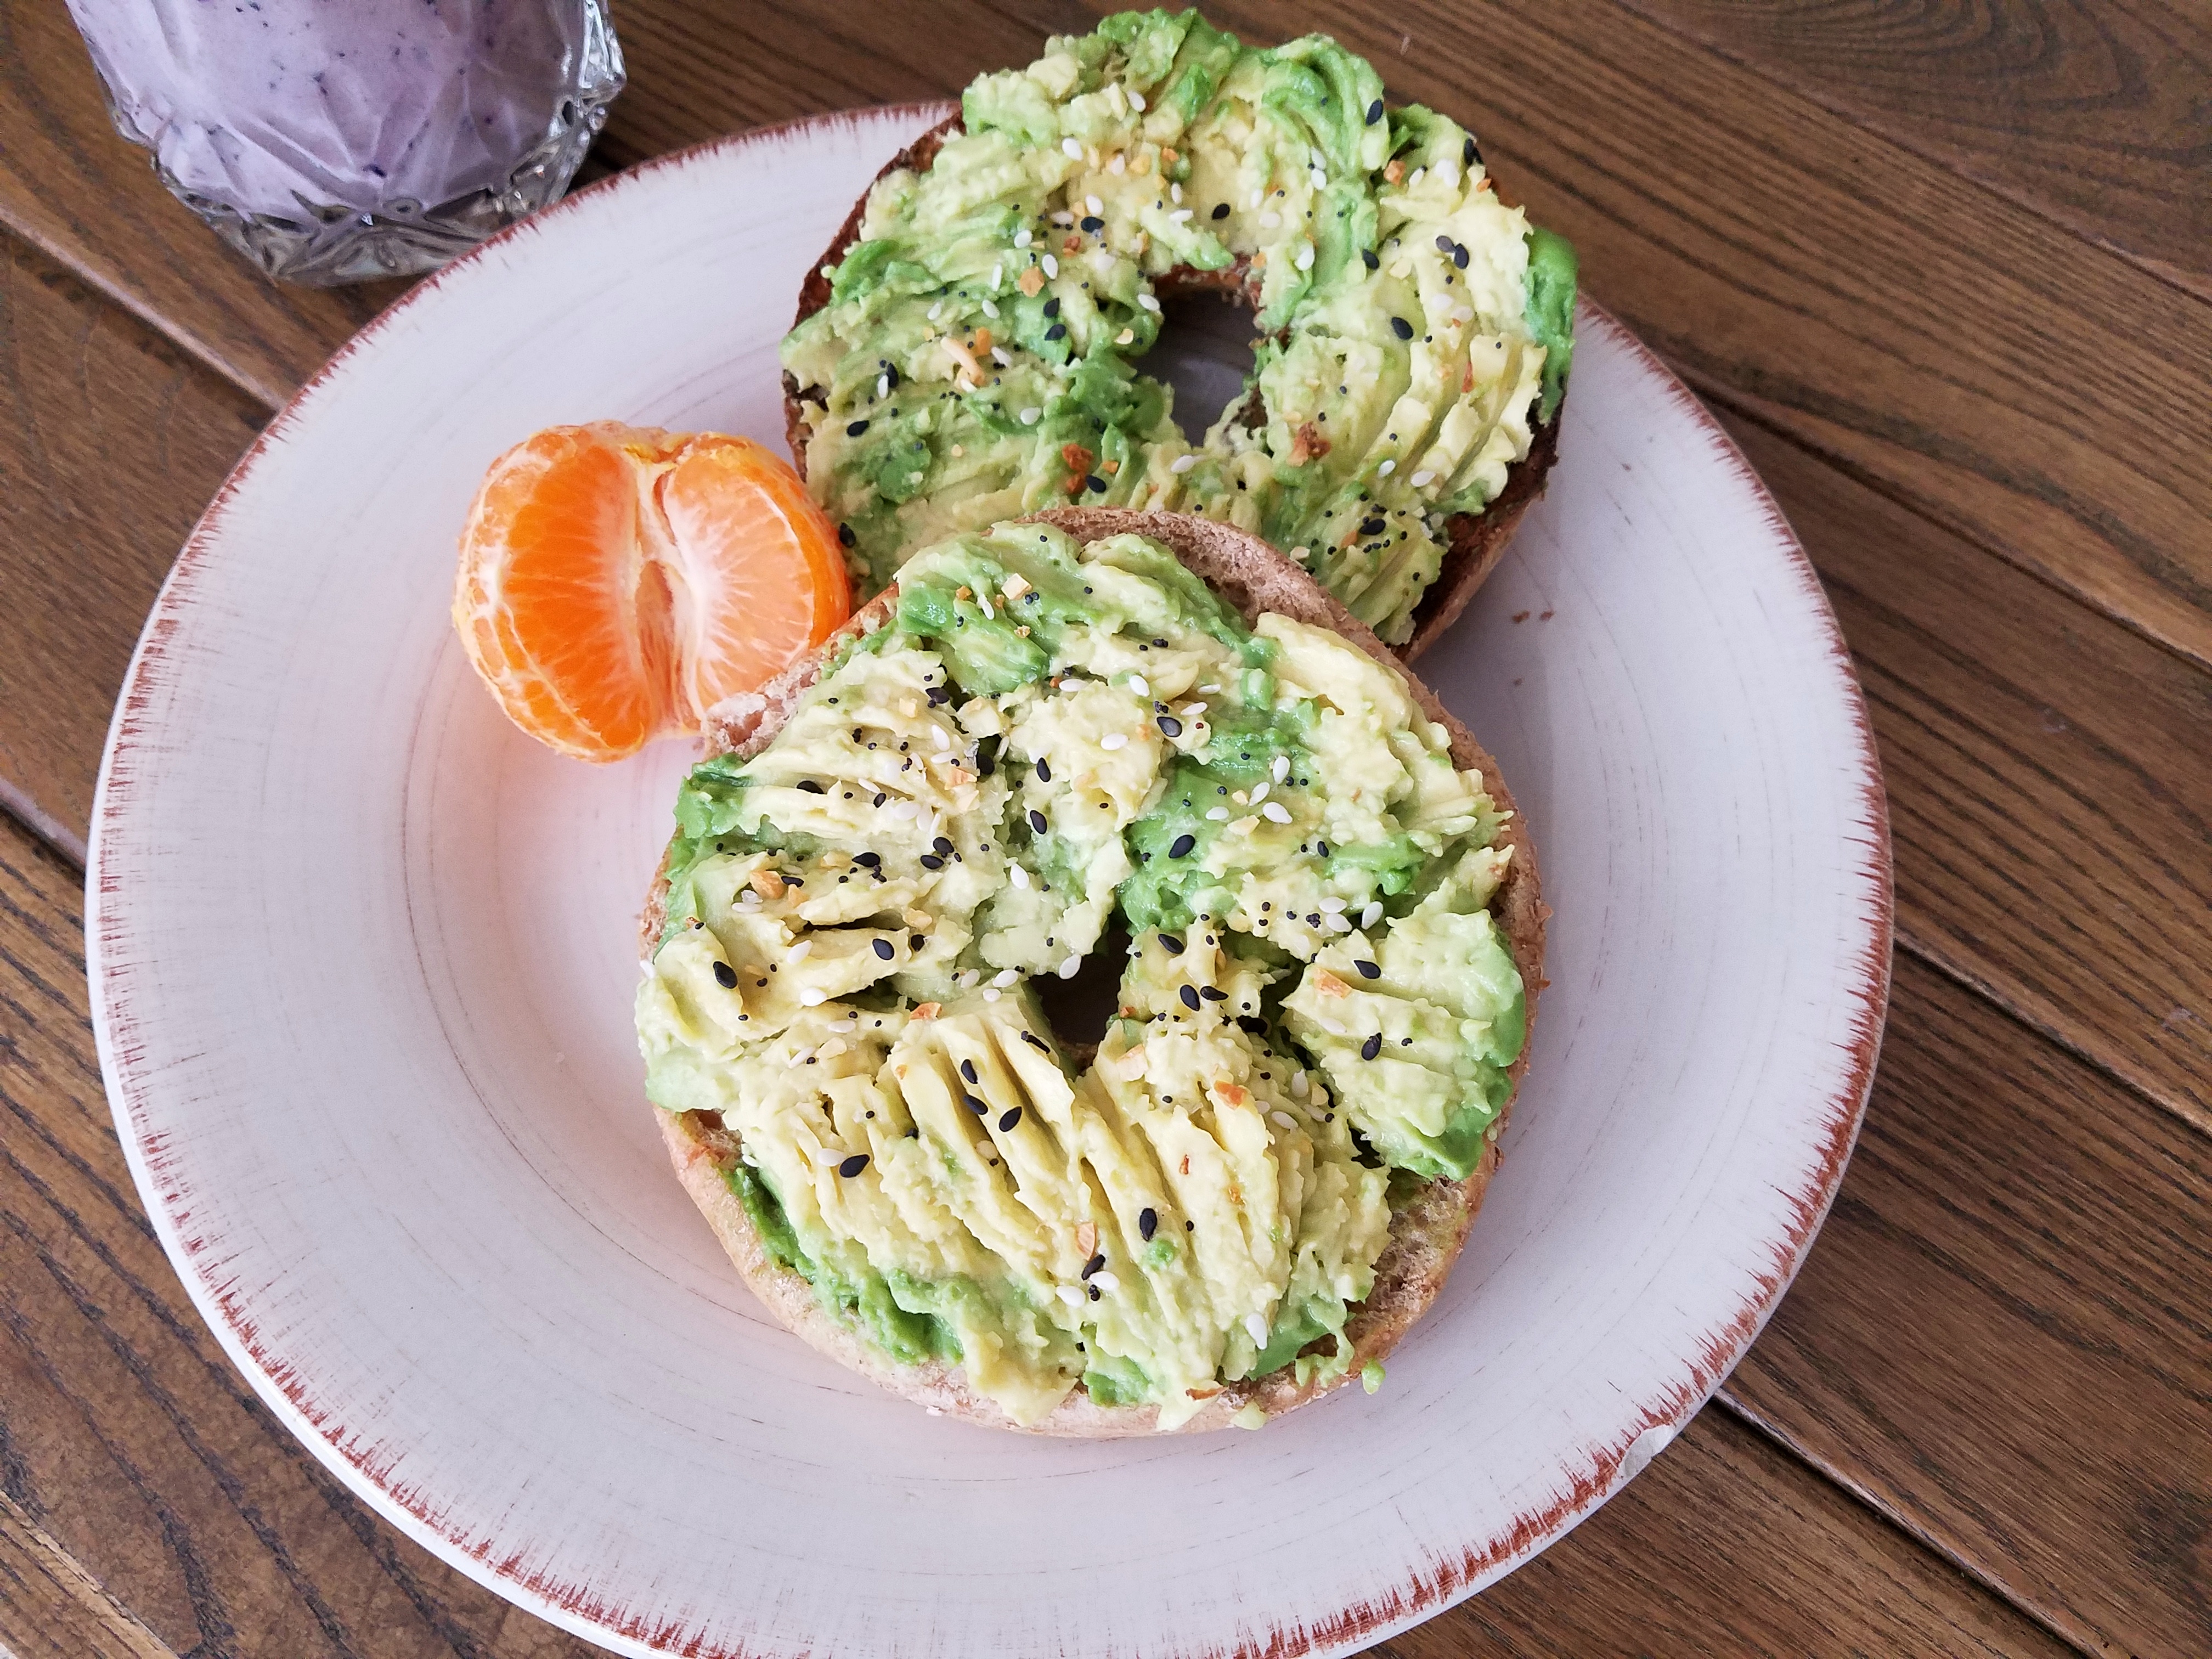 Avocado Everything Bagel – Hearty Smarty